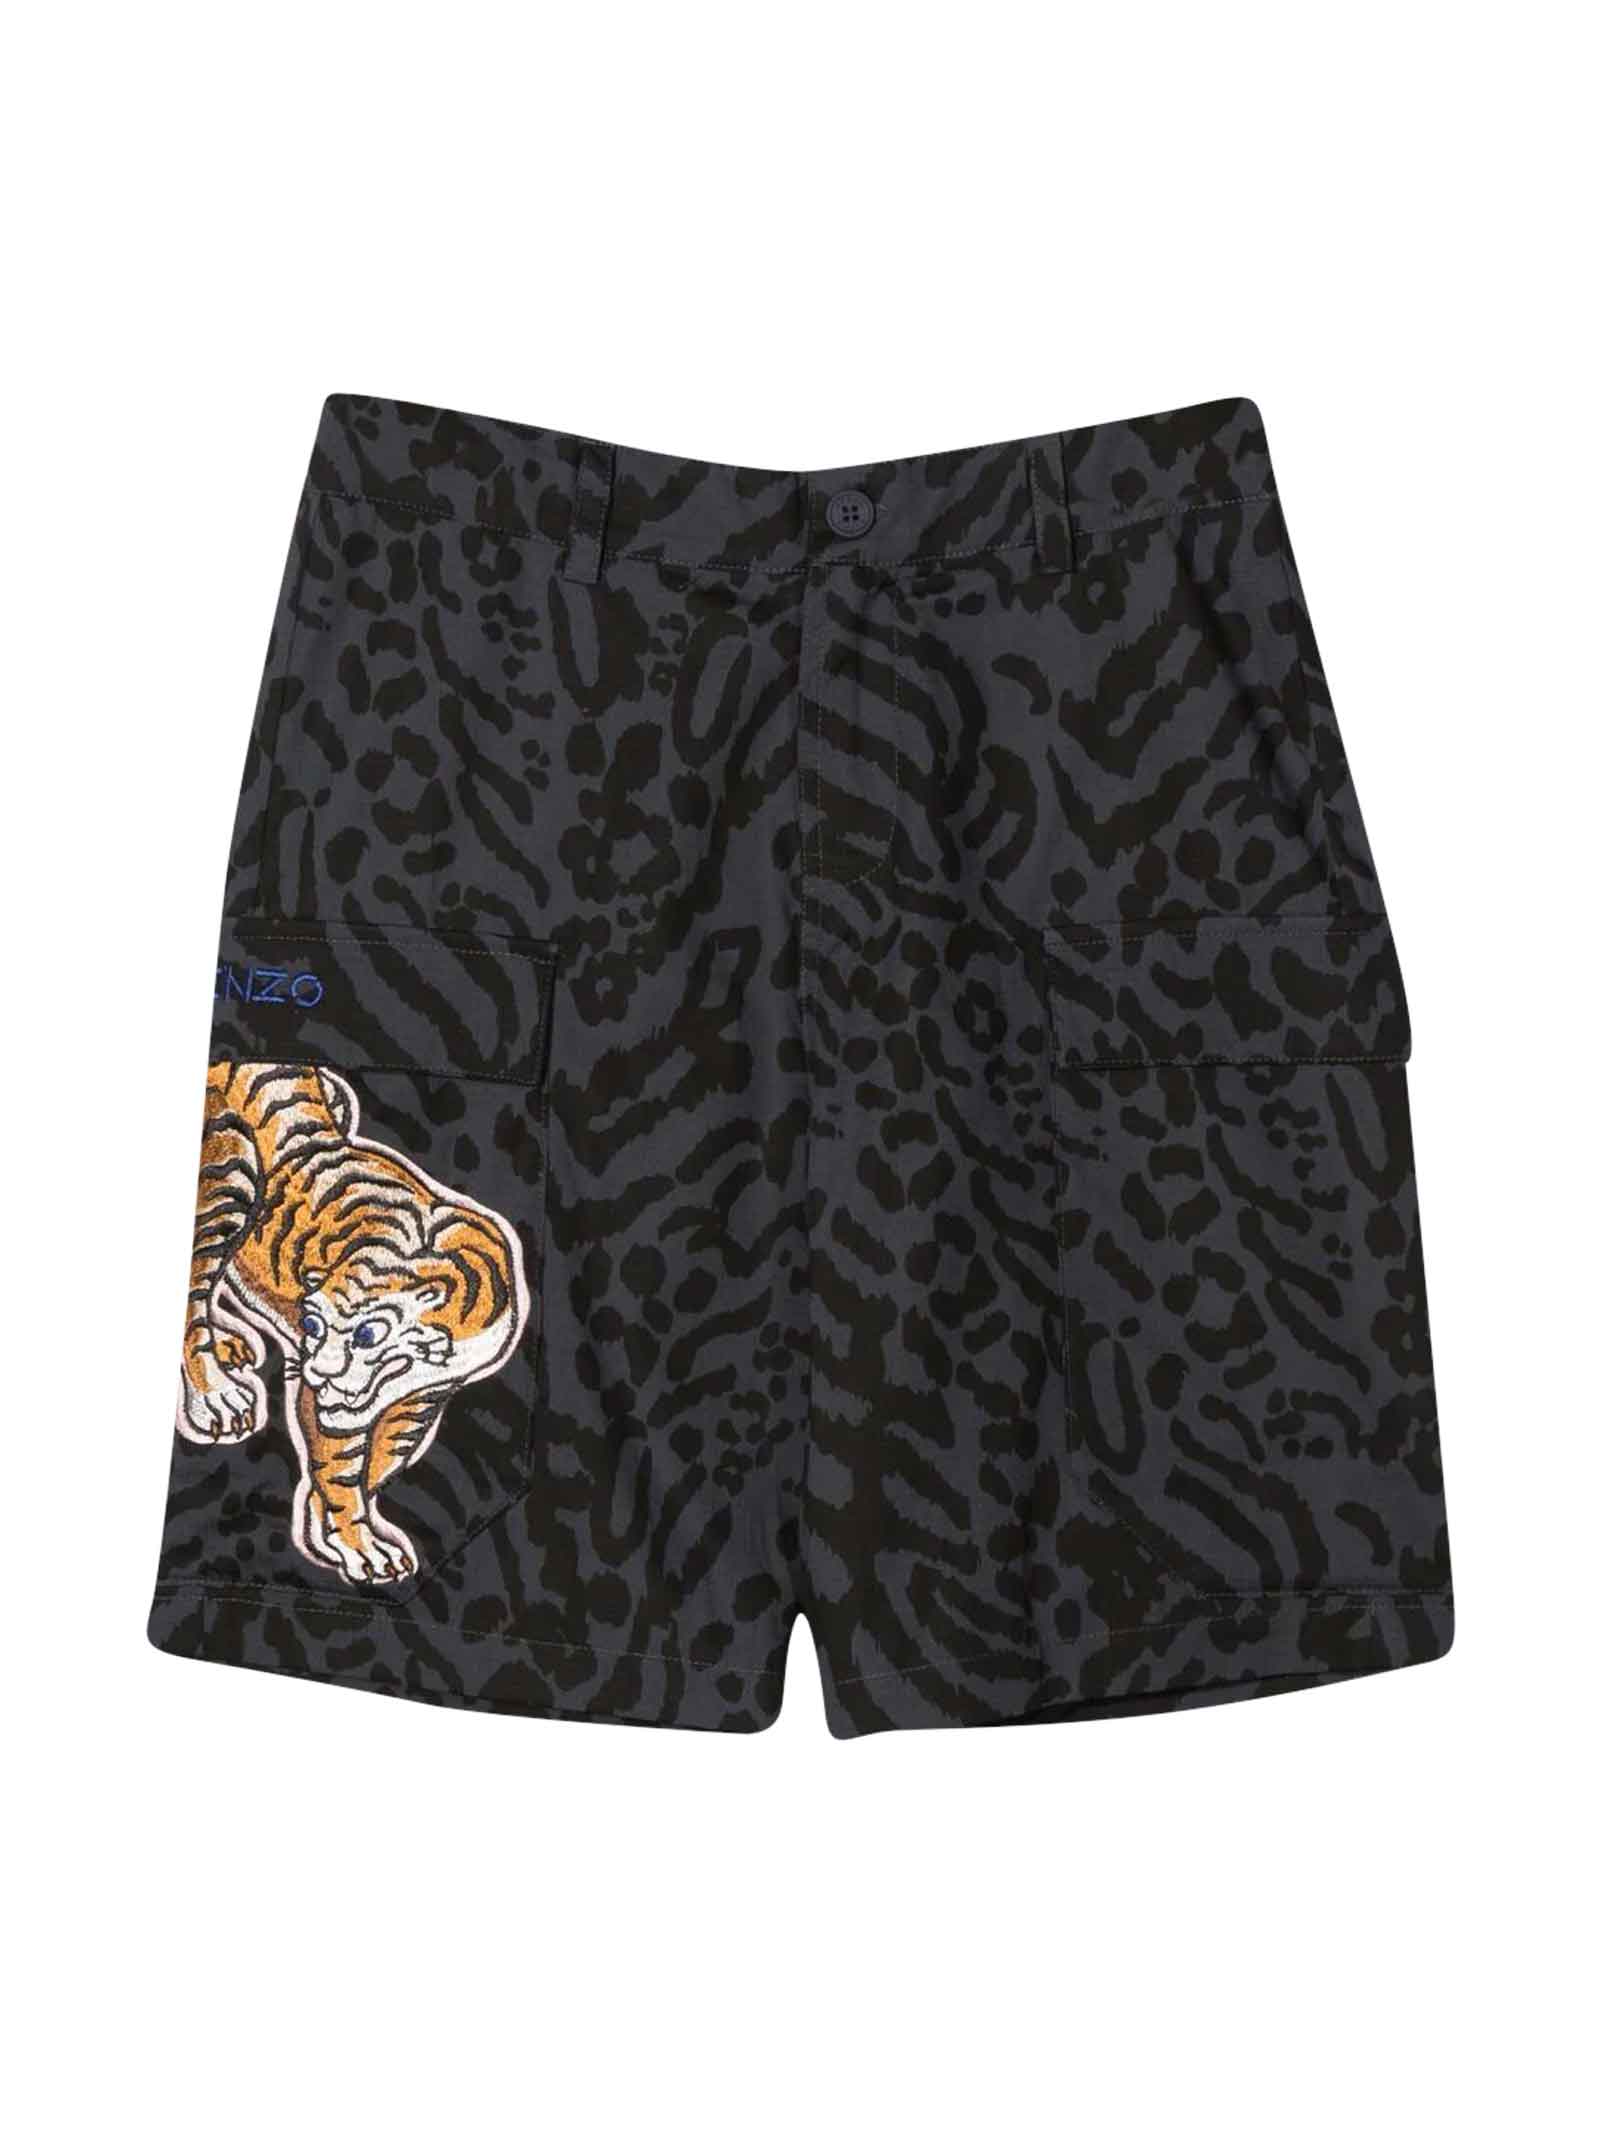 Kenzo Kids Anthracite Boy Shorts With Print. Detail With Application, Tiger Print, Belt Loops, Button Closure And Two Front Pockets With Flap By.